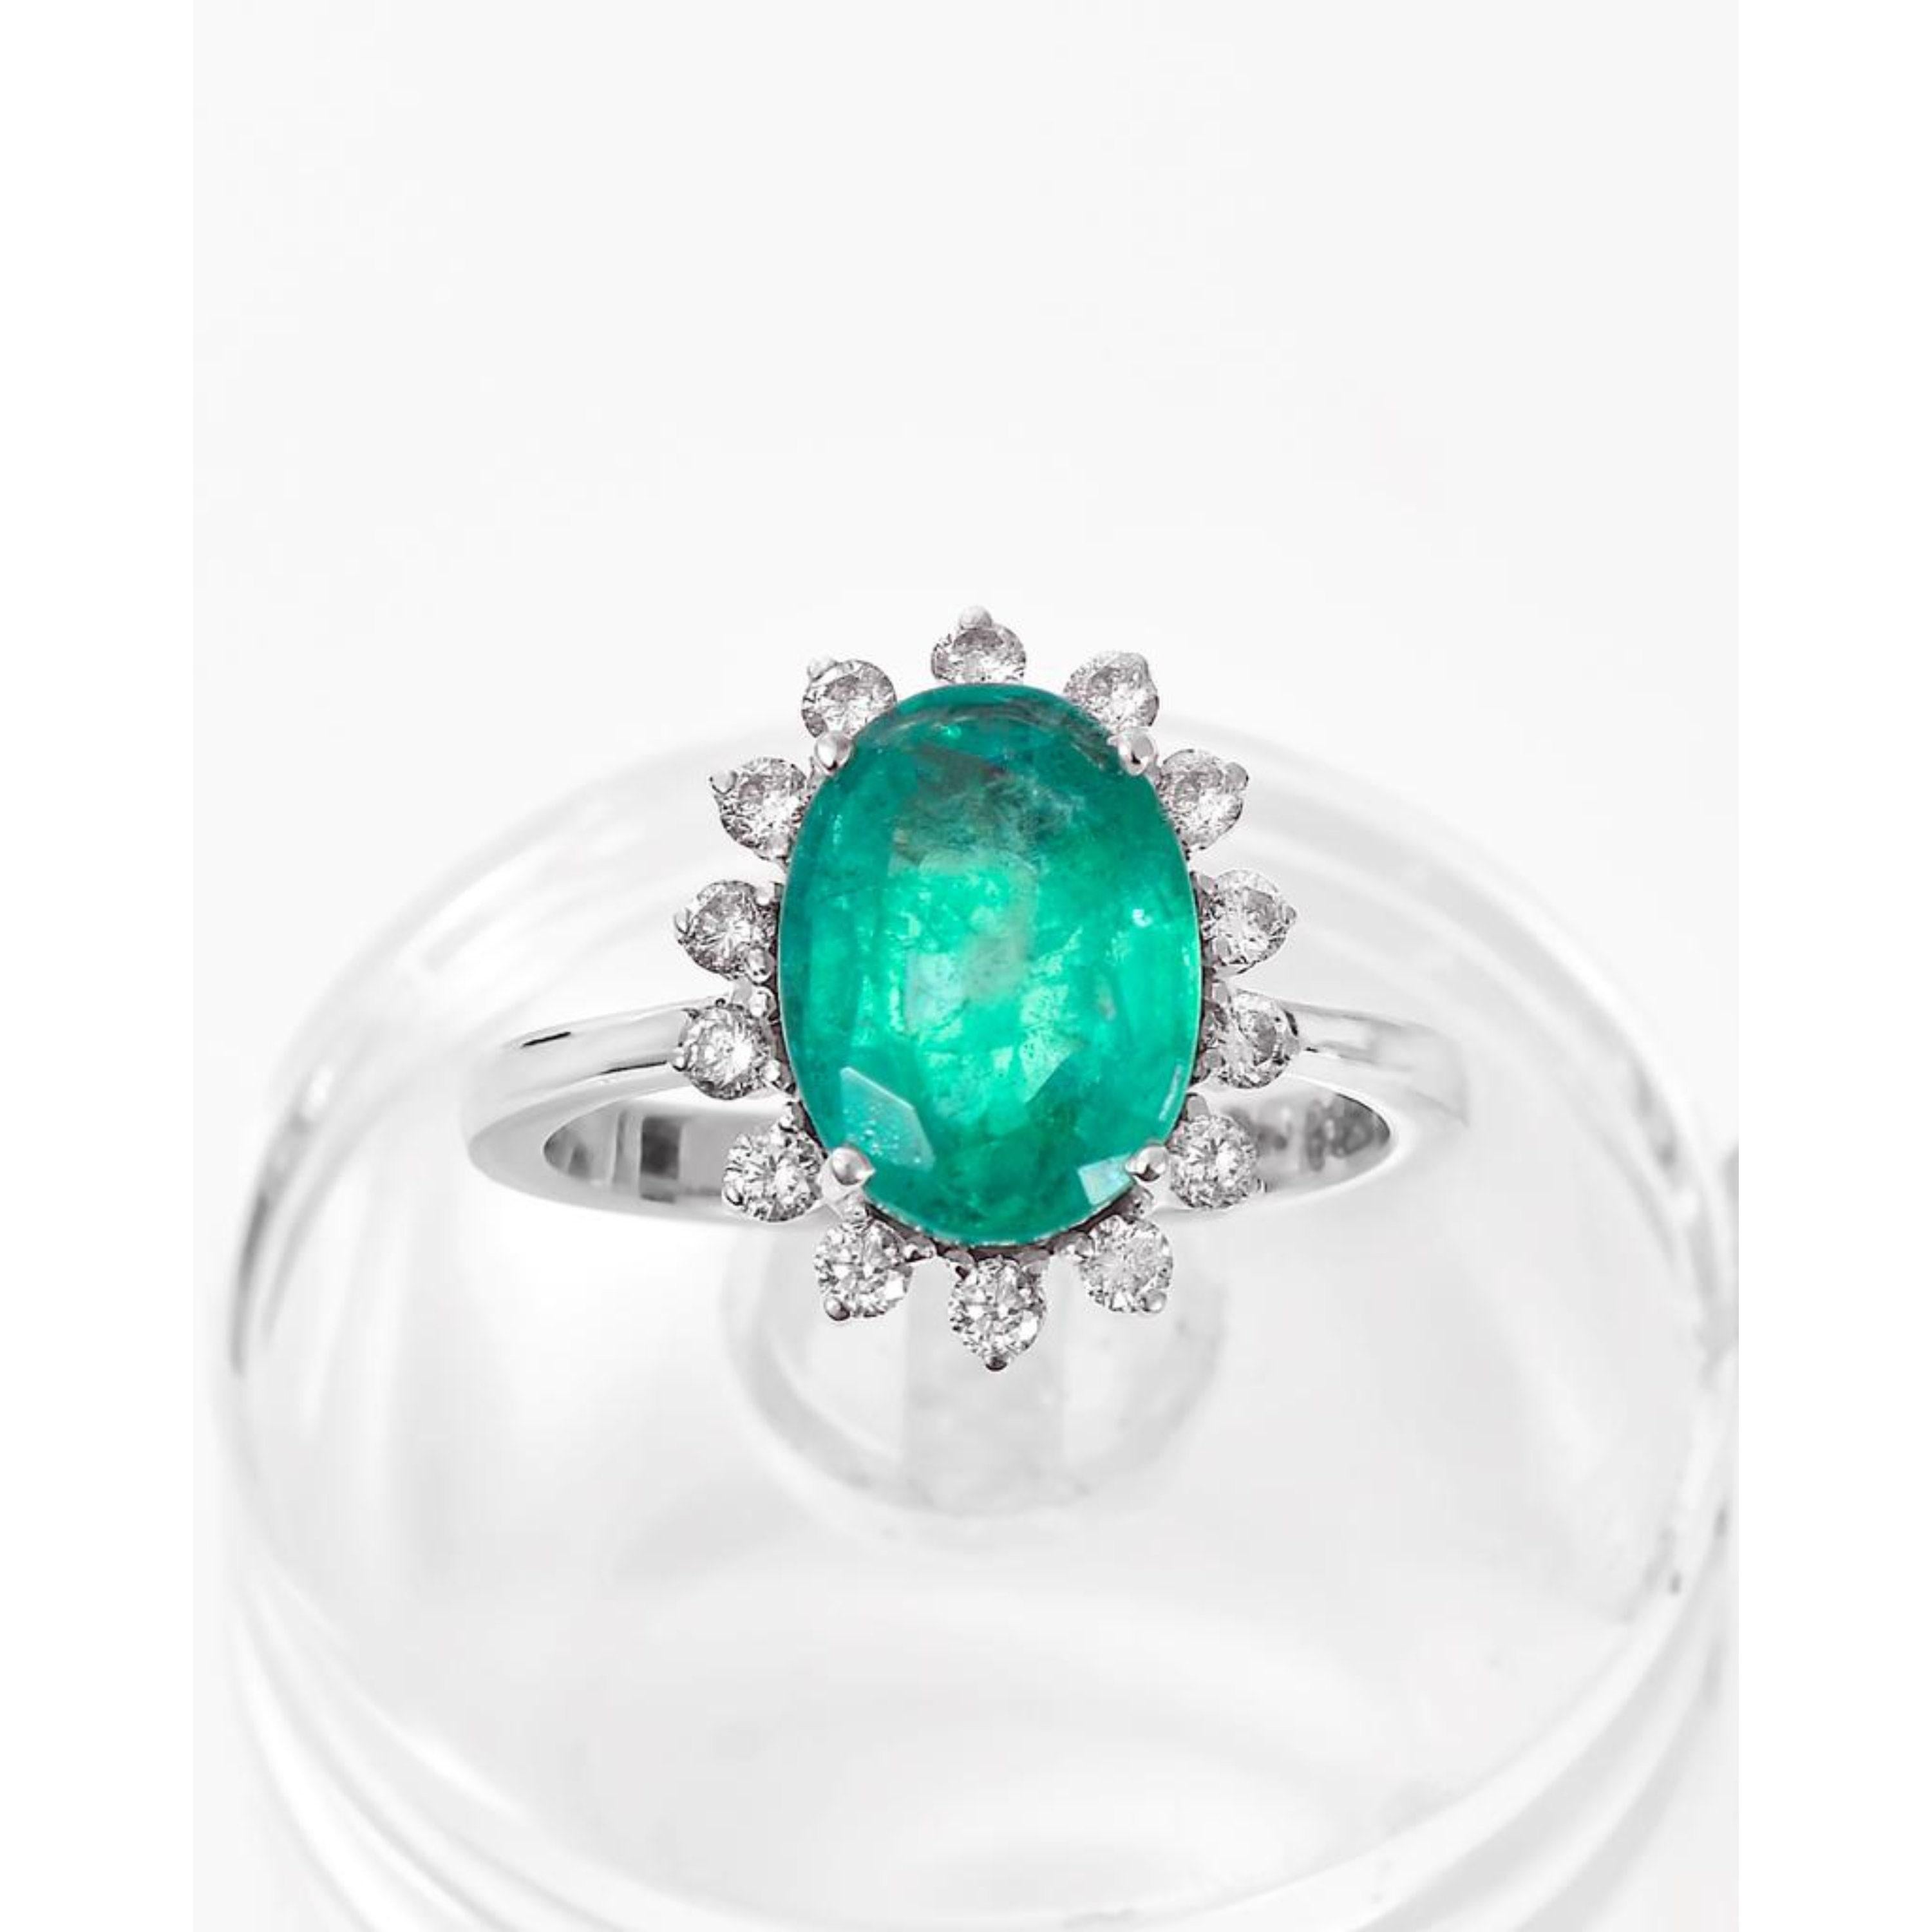 For Sale:  White Gold 3 Carat Emerald Engagement Ring, Unique Emerald Diamond Wedding Ring 4